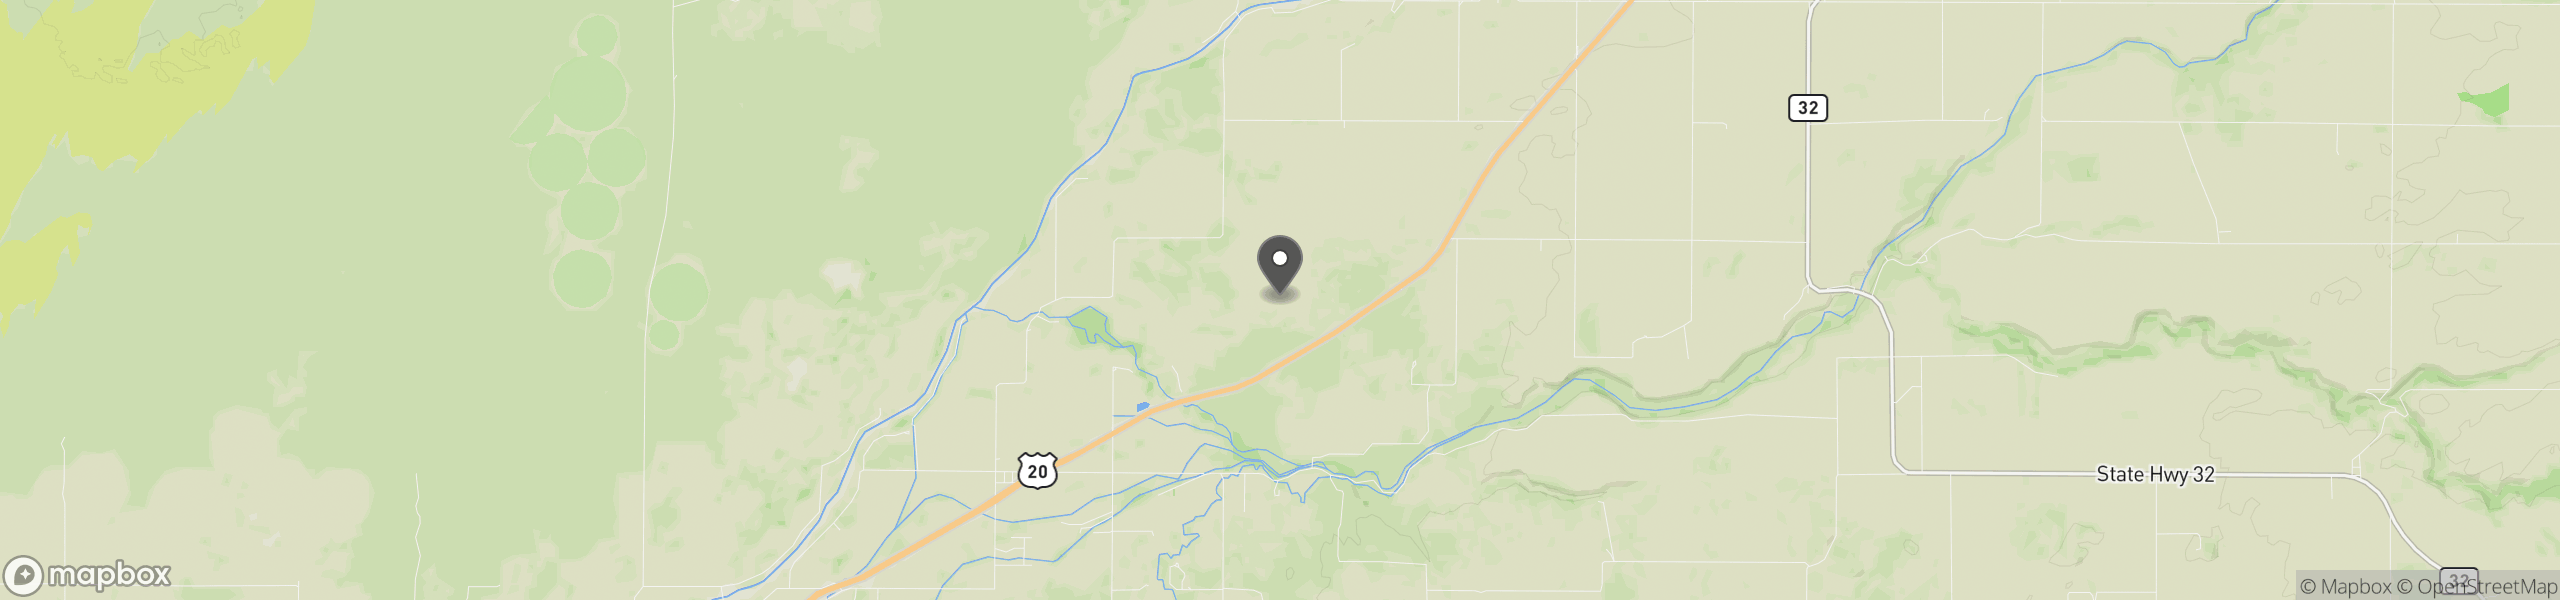 Chester, ID 83421